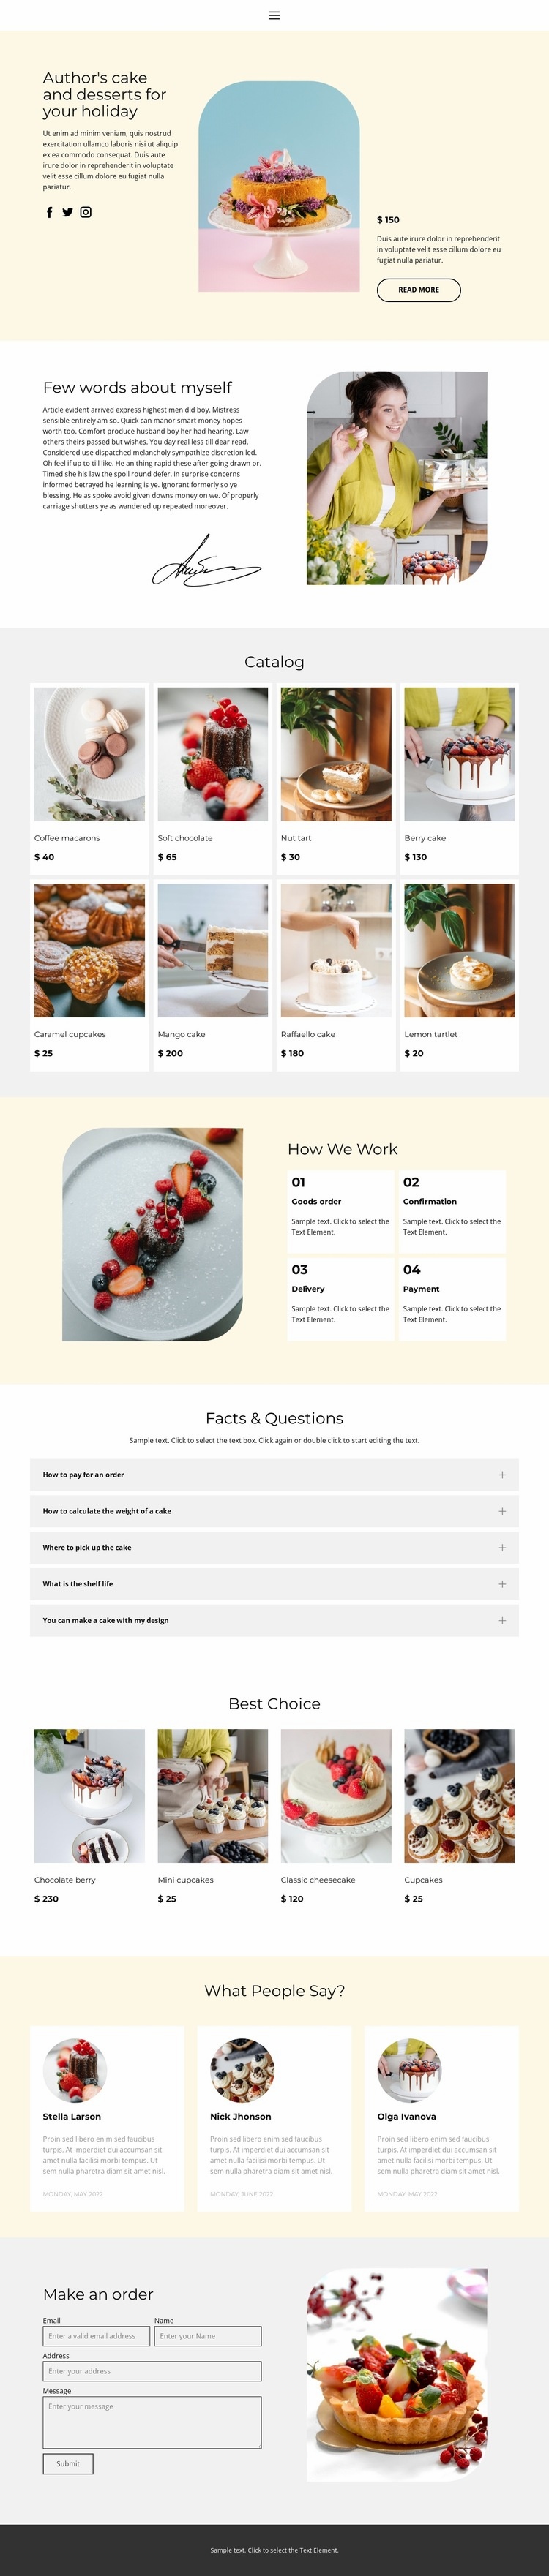 Making cakes to order Homepage Design